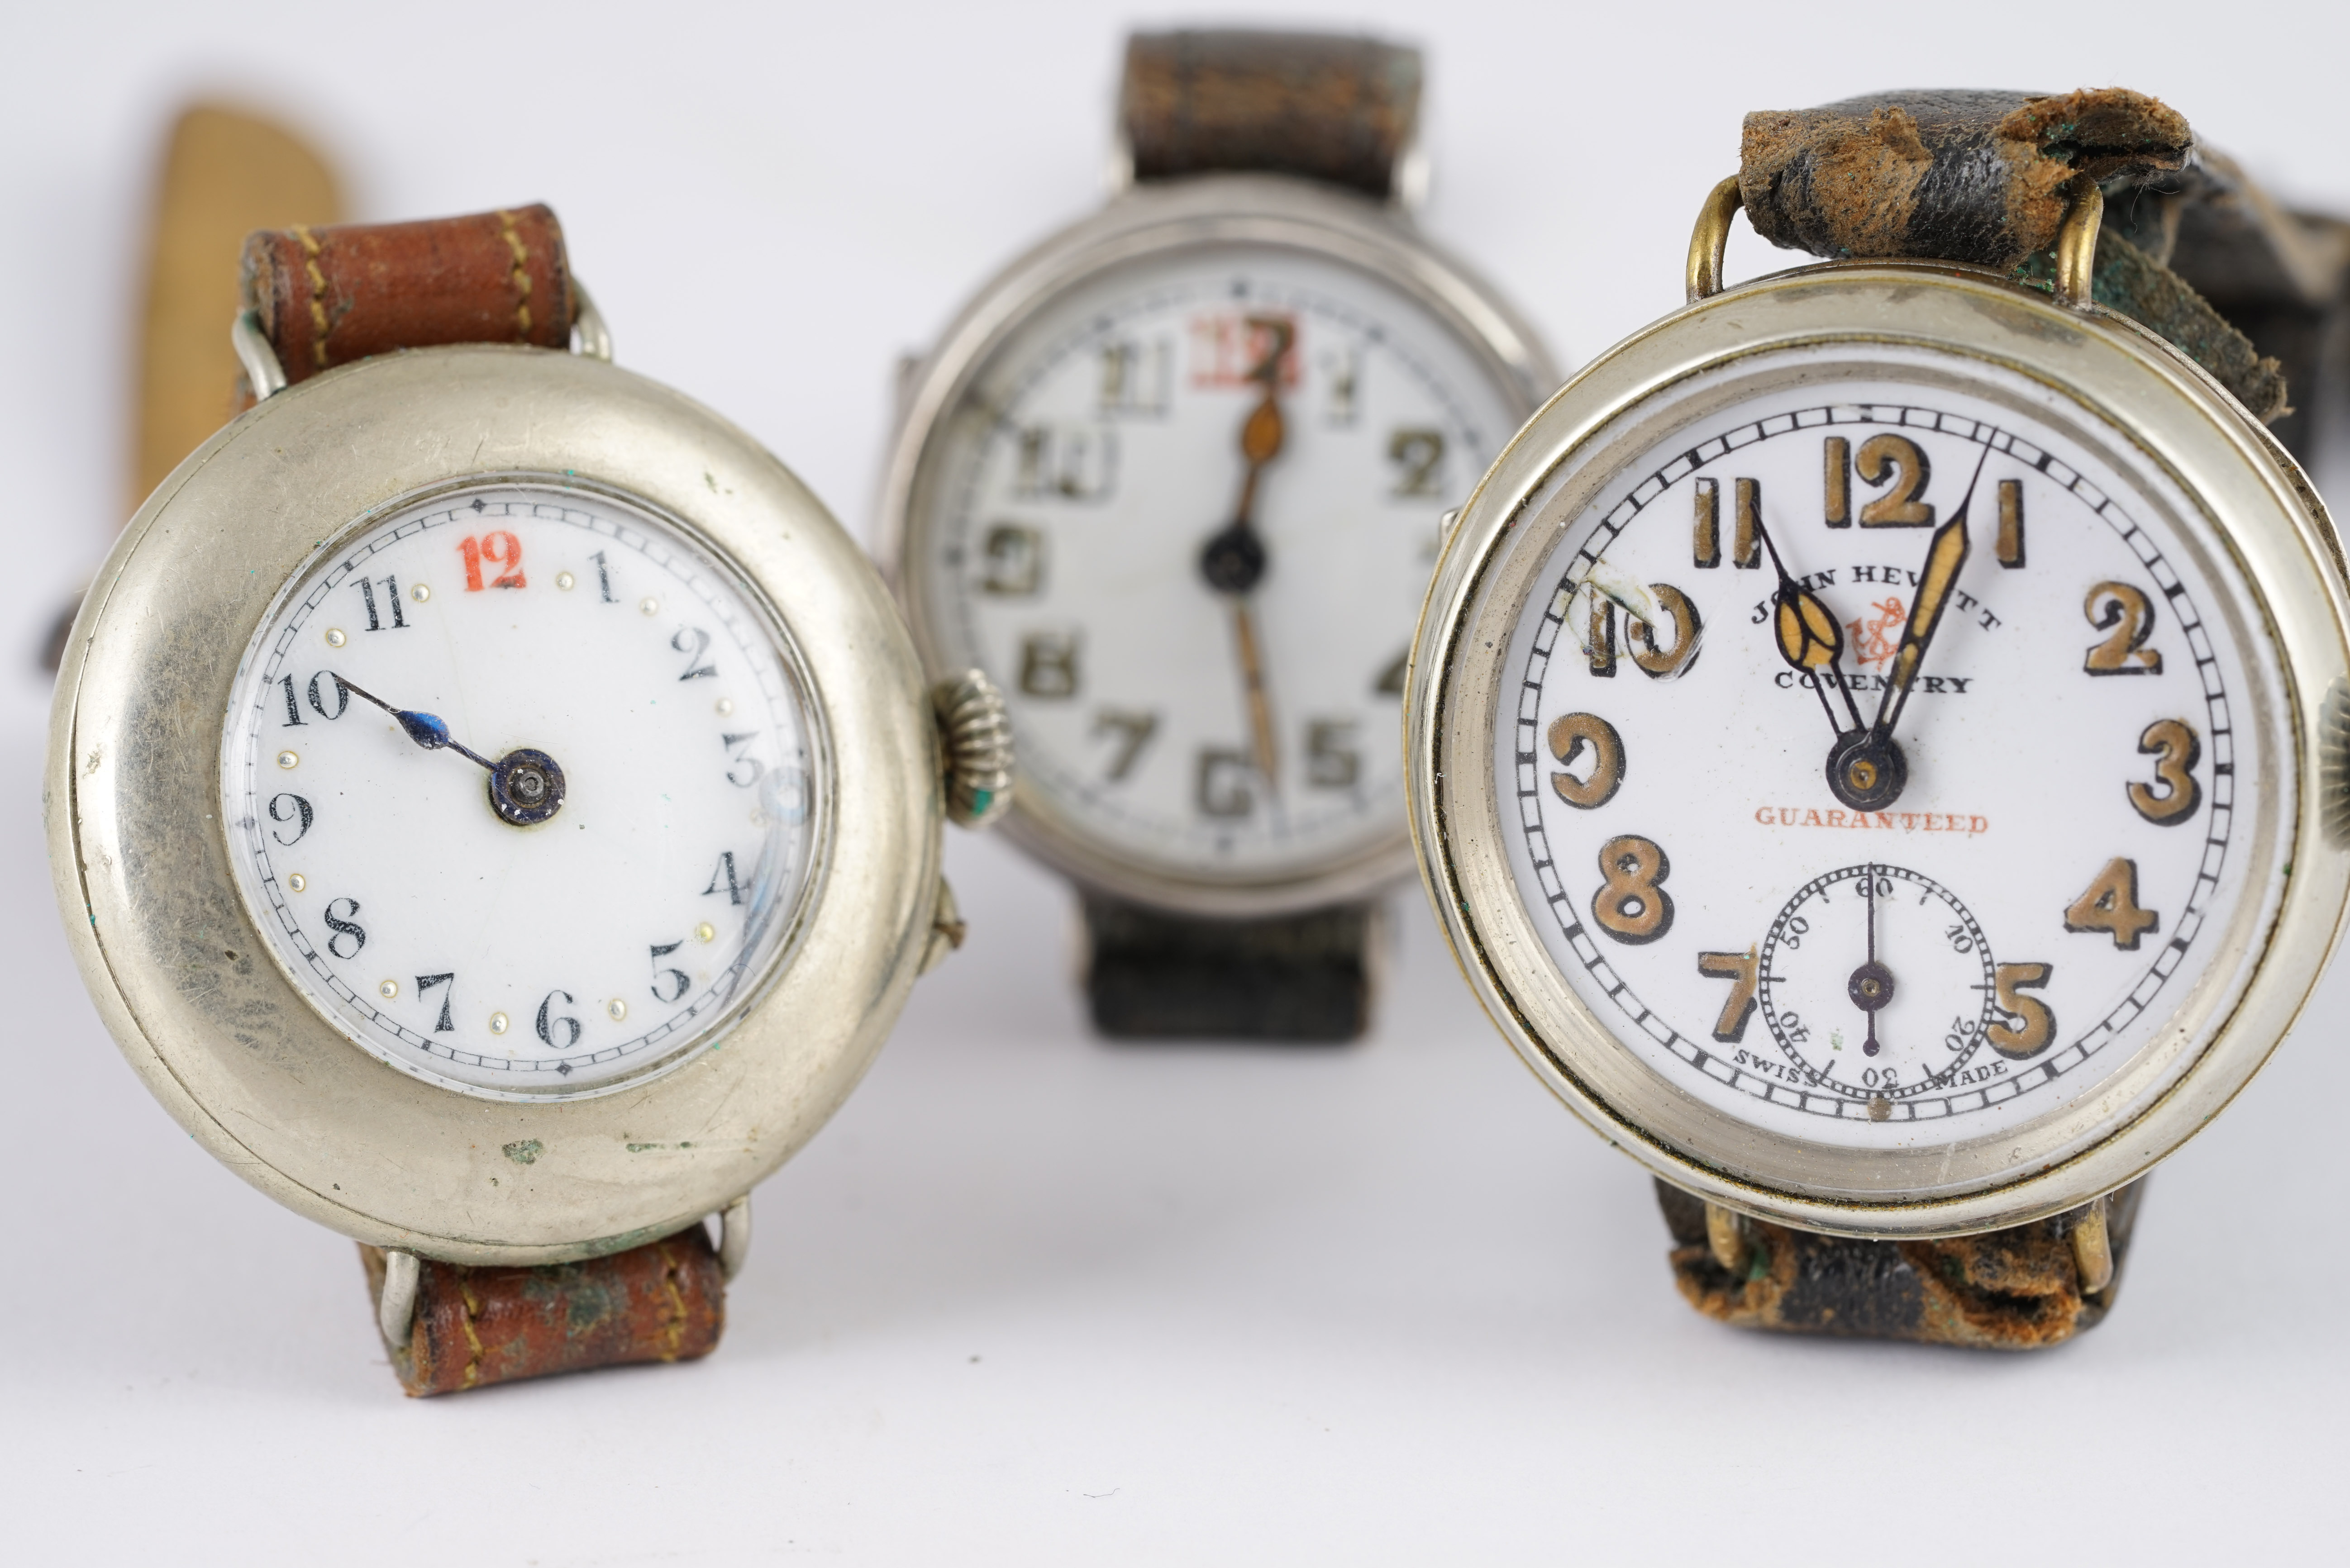 ***SOLD AS SEEN*** GROUP OF 3 WWI PERIOD TRENCH WRISTWATCH, ceramic white dial with arabic numerals,